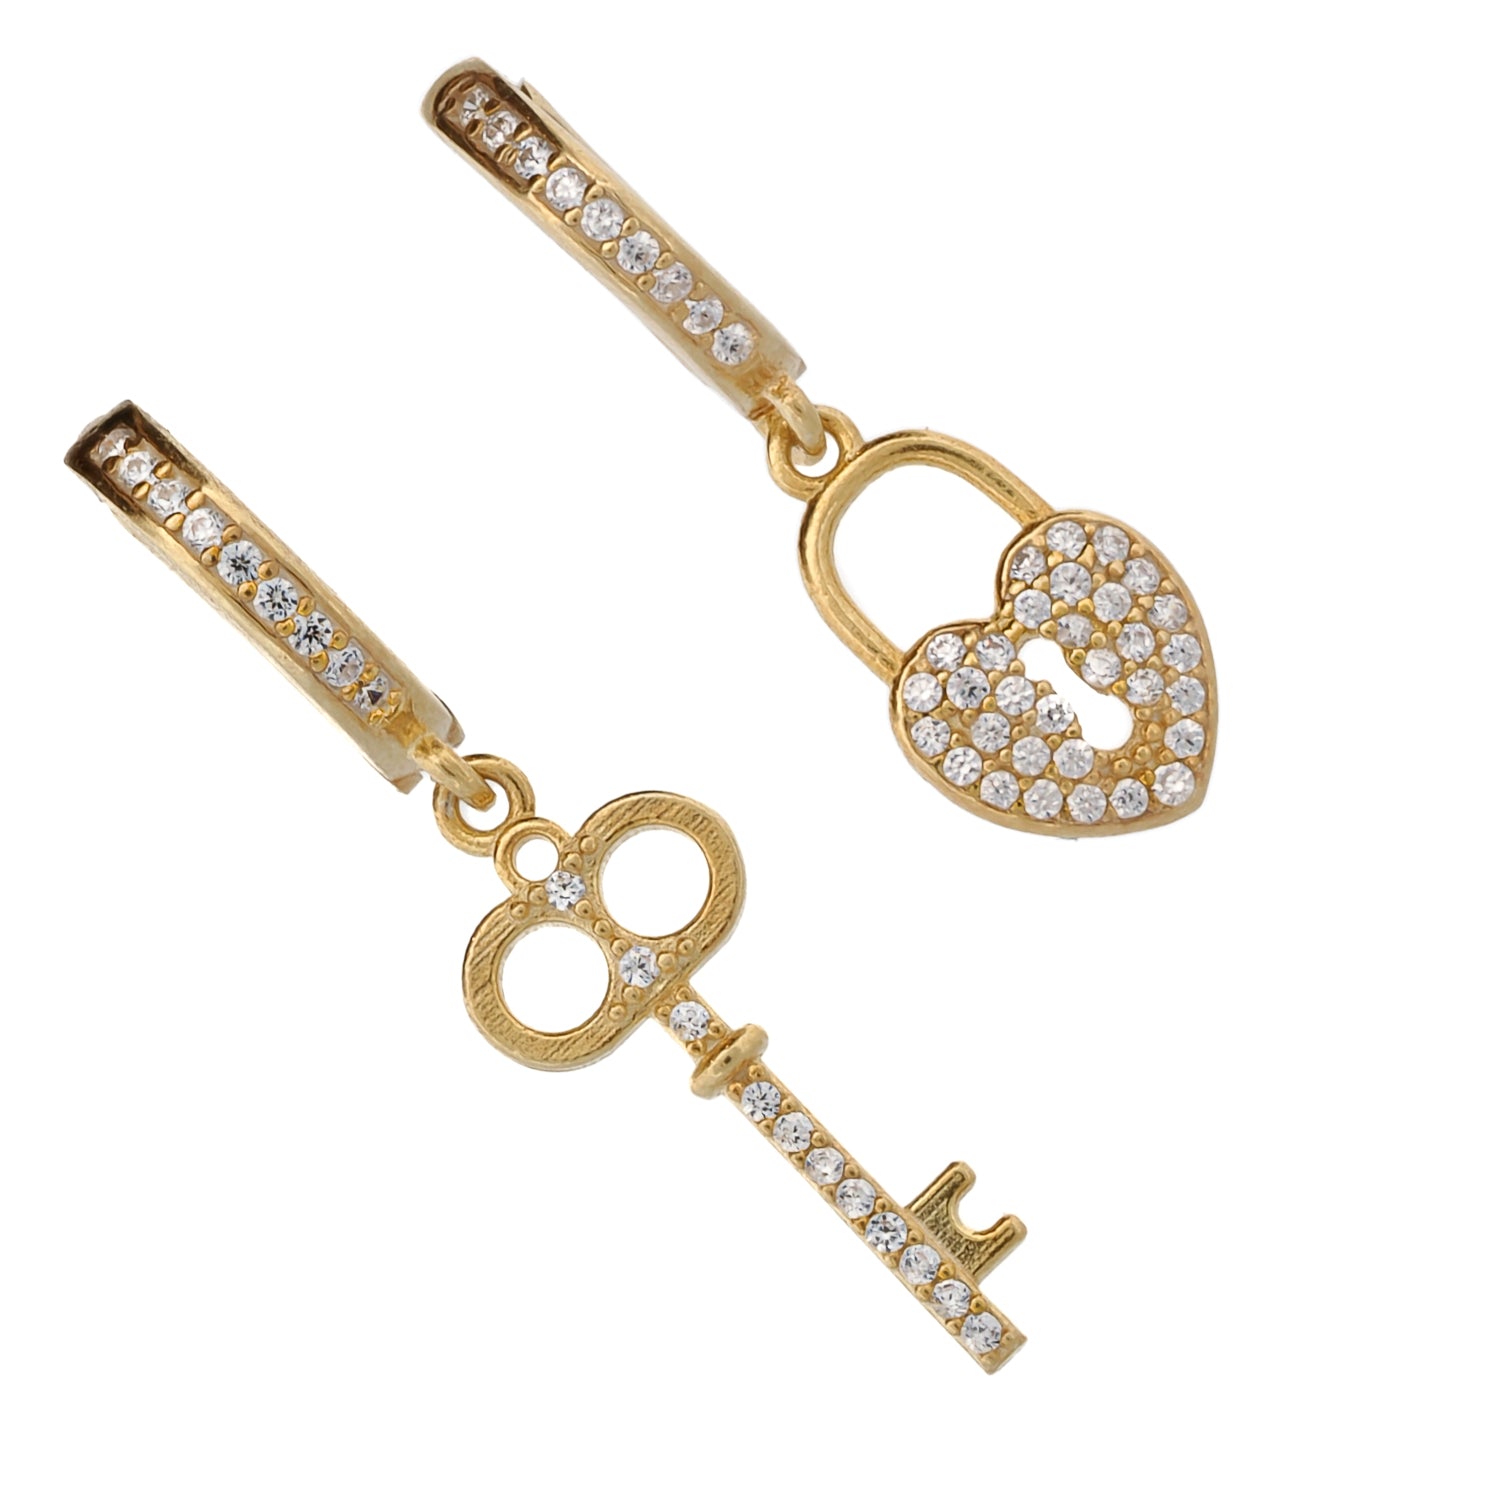 Tokens of Love: Everyday Wear Gold Plated Diamond Earrings